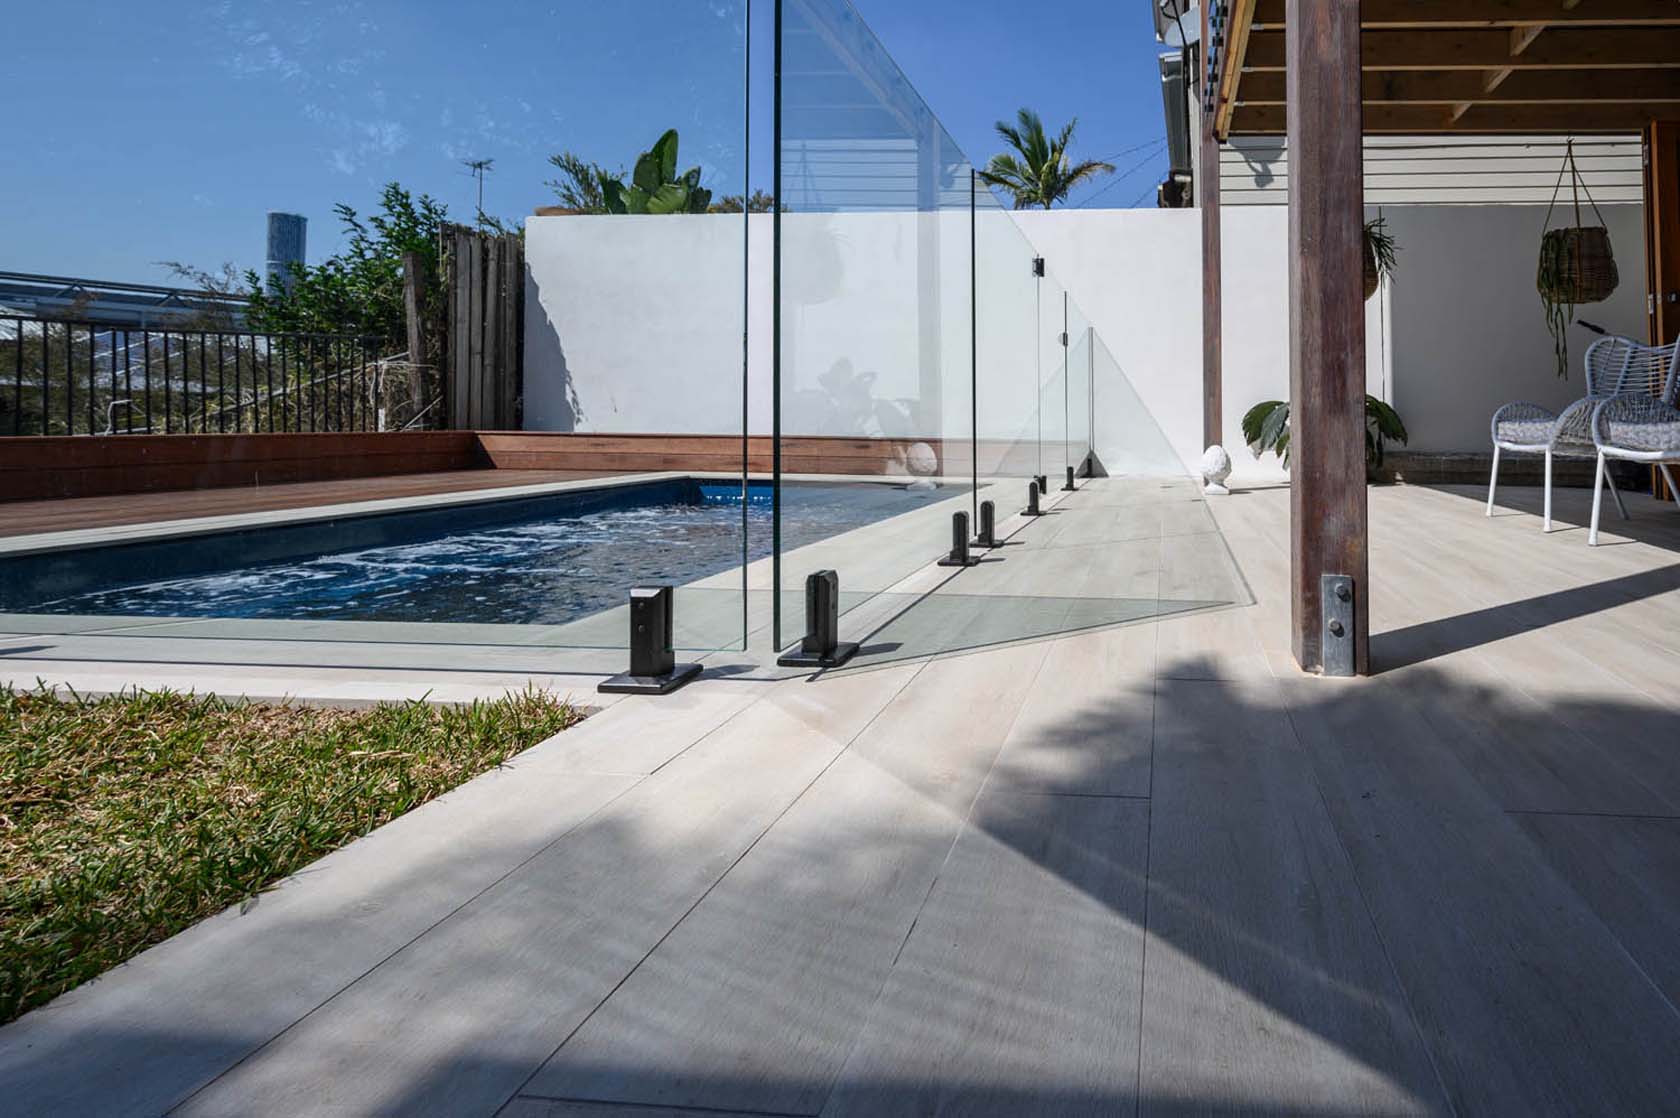 Beige TileDeck pool coping and outdoor tiled area